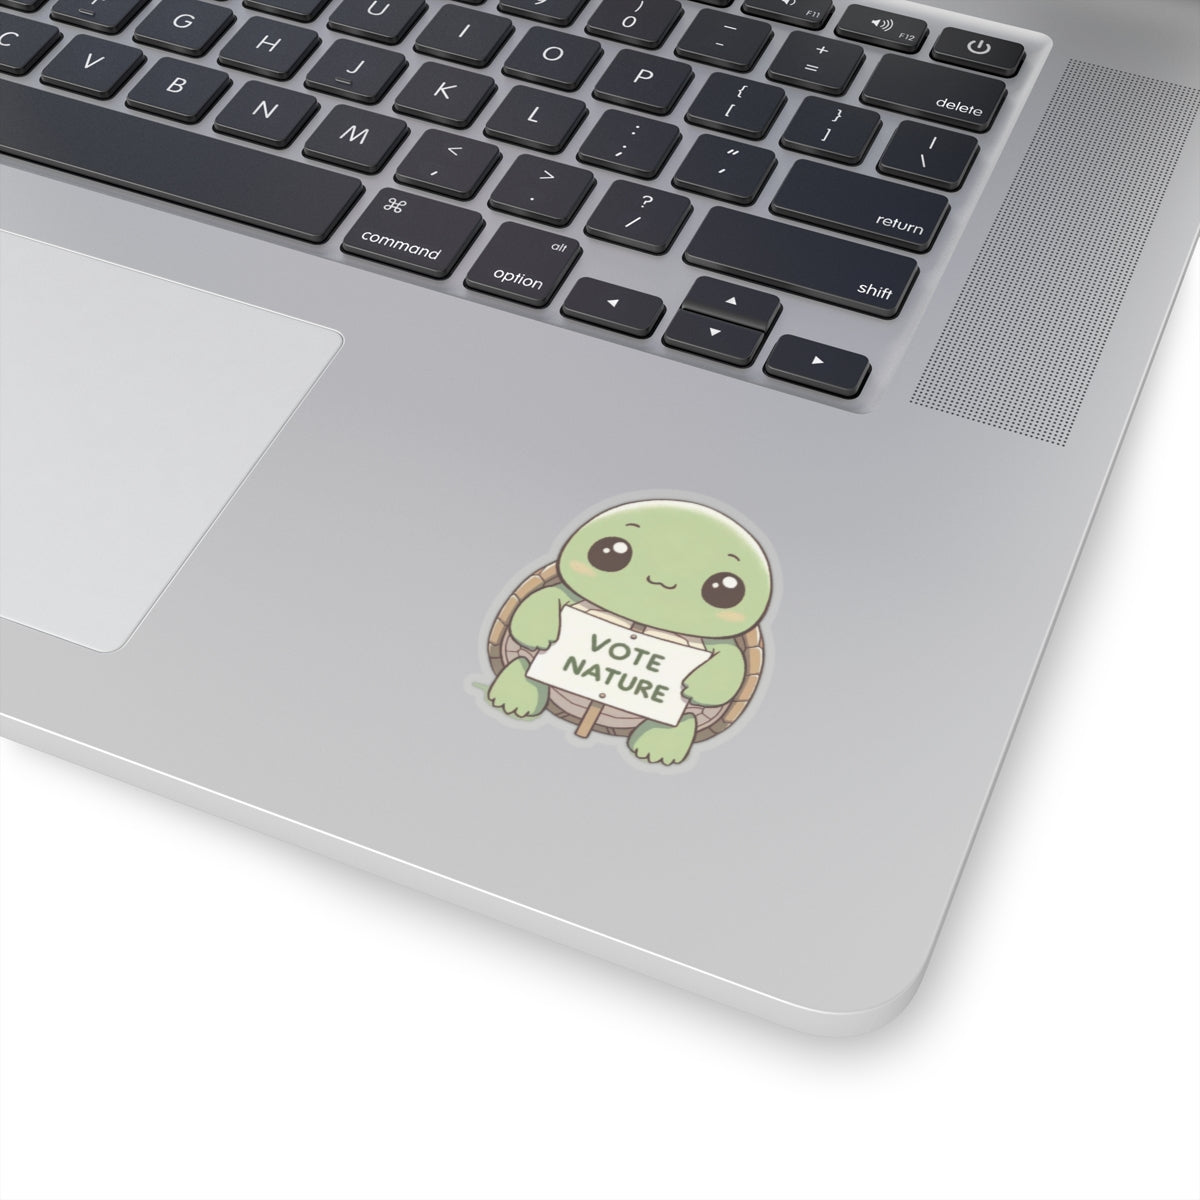 Inspirational Cute Turtle Statement vinyl Sticker: Vote Nature! for laptop, kindle, phone, ipad, instrument case, notebook, mood board